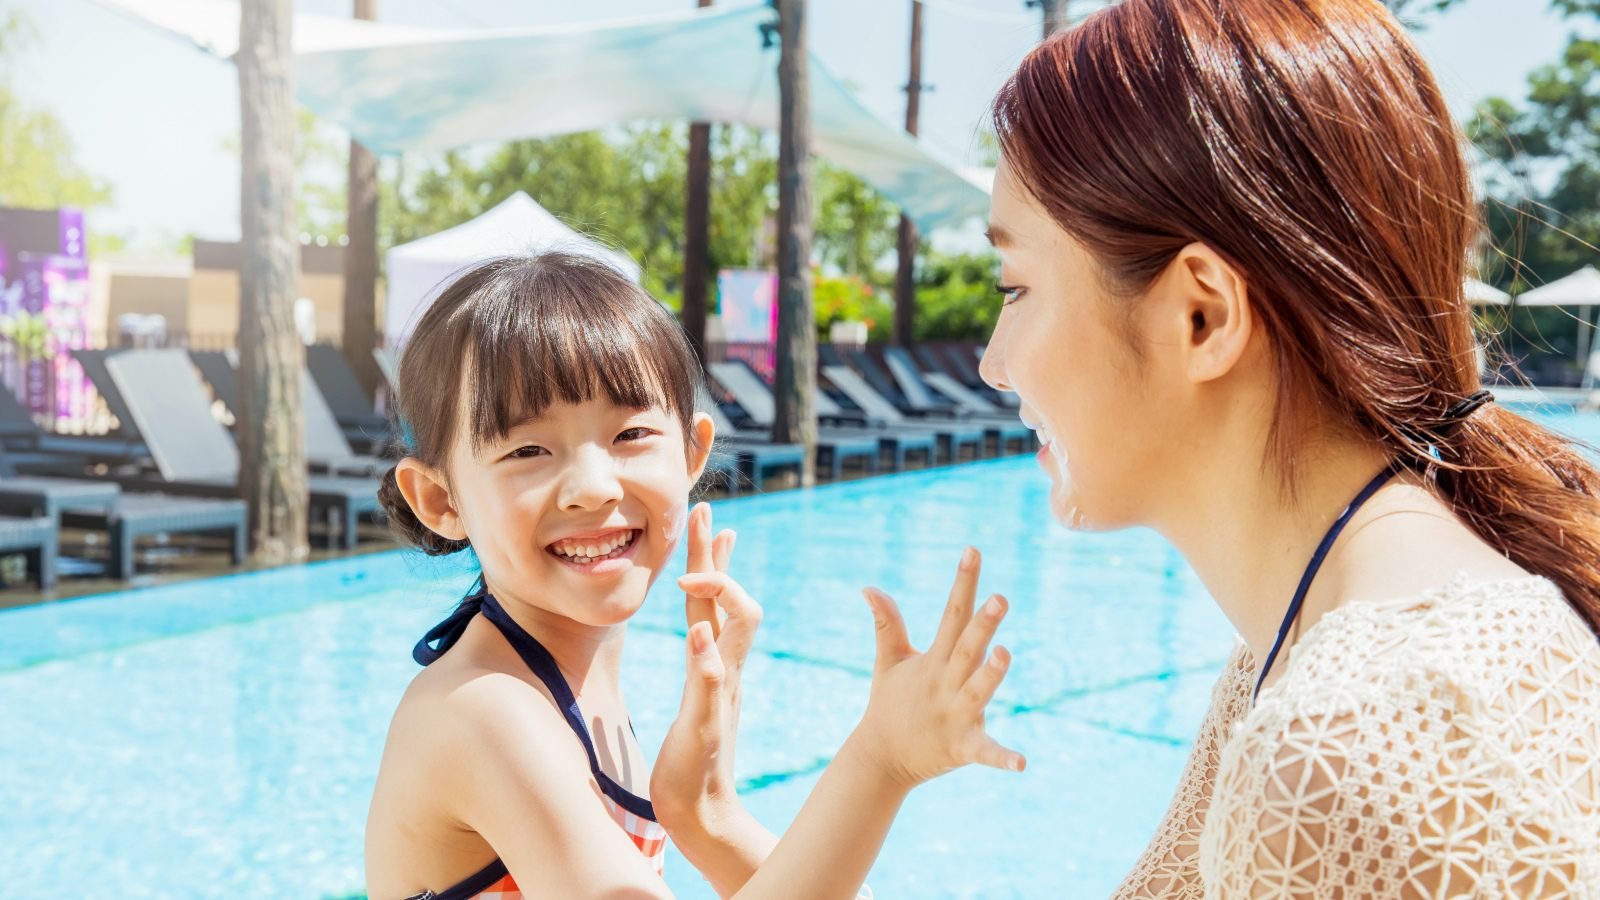 Korean Sunscreens Are Your Best Friends. Here’s Why?